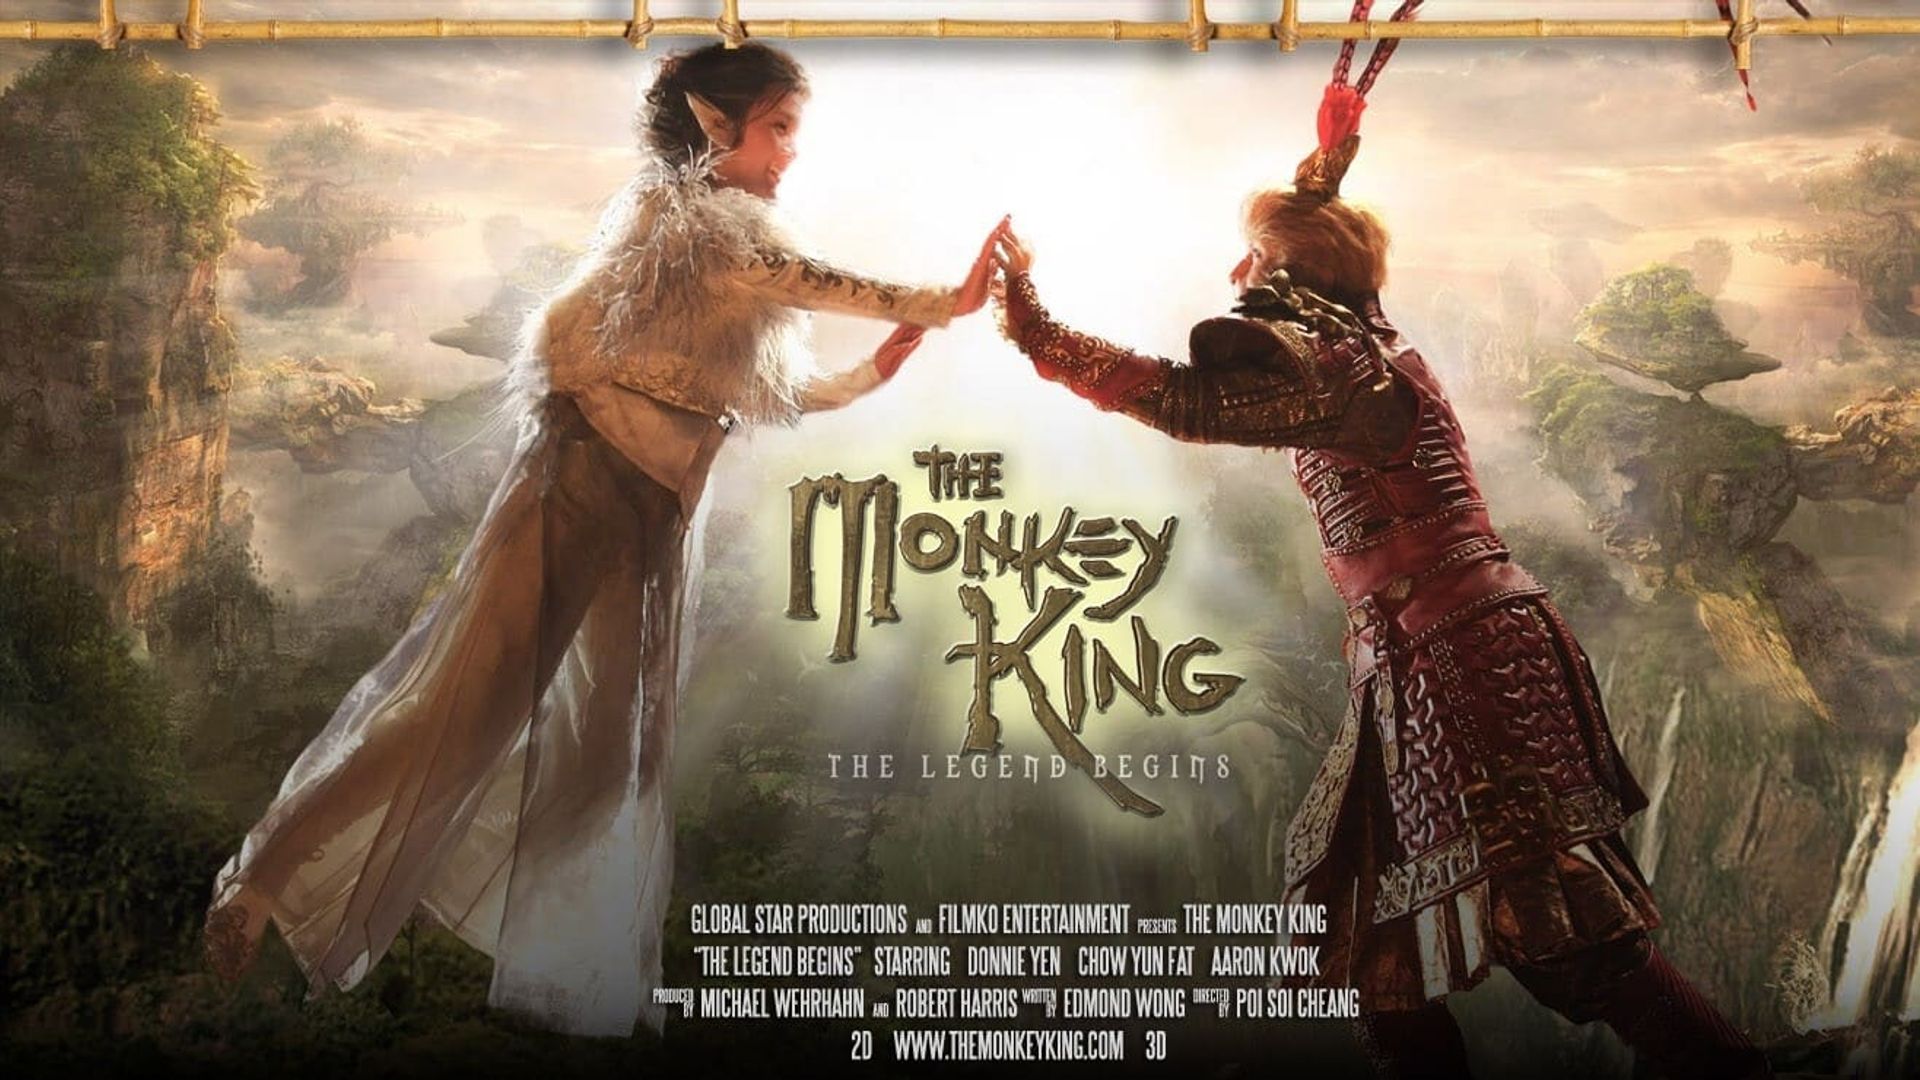 The Monkey King: The Legend Begins background